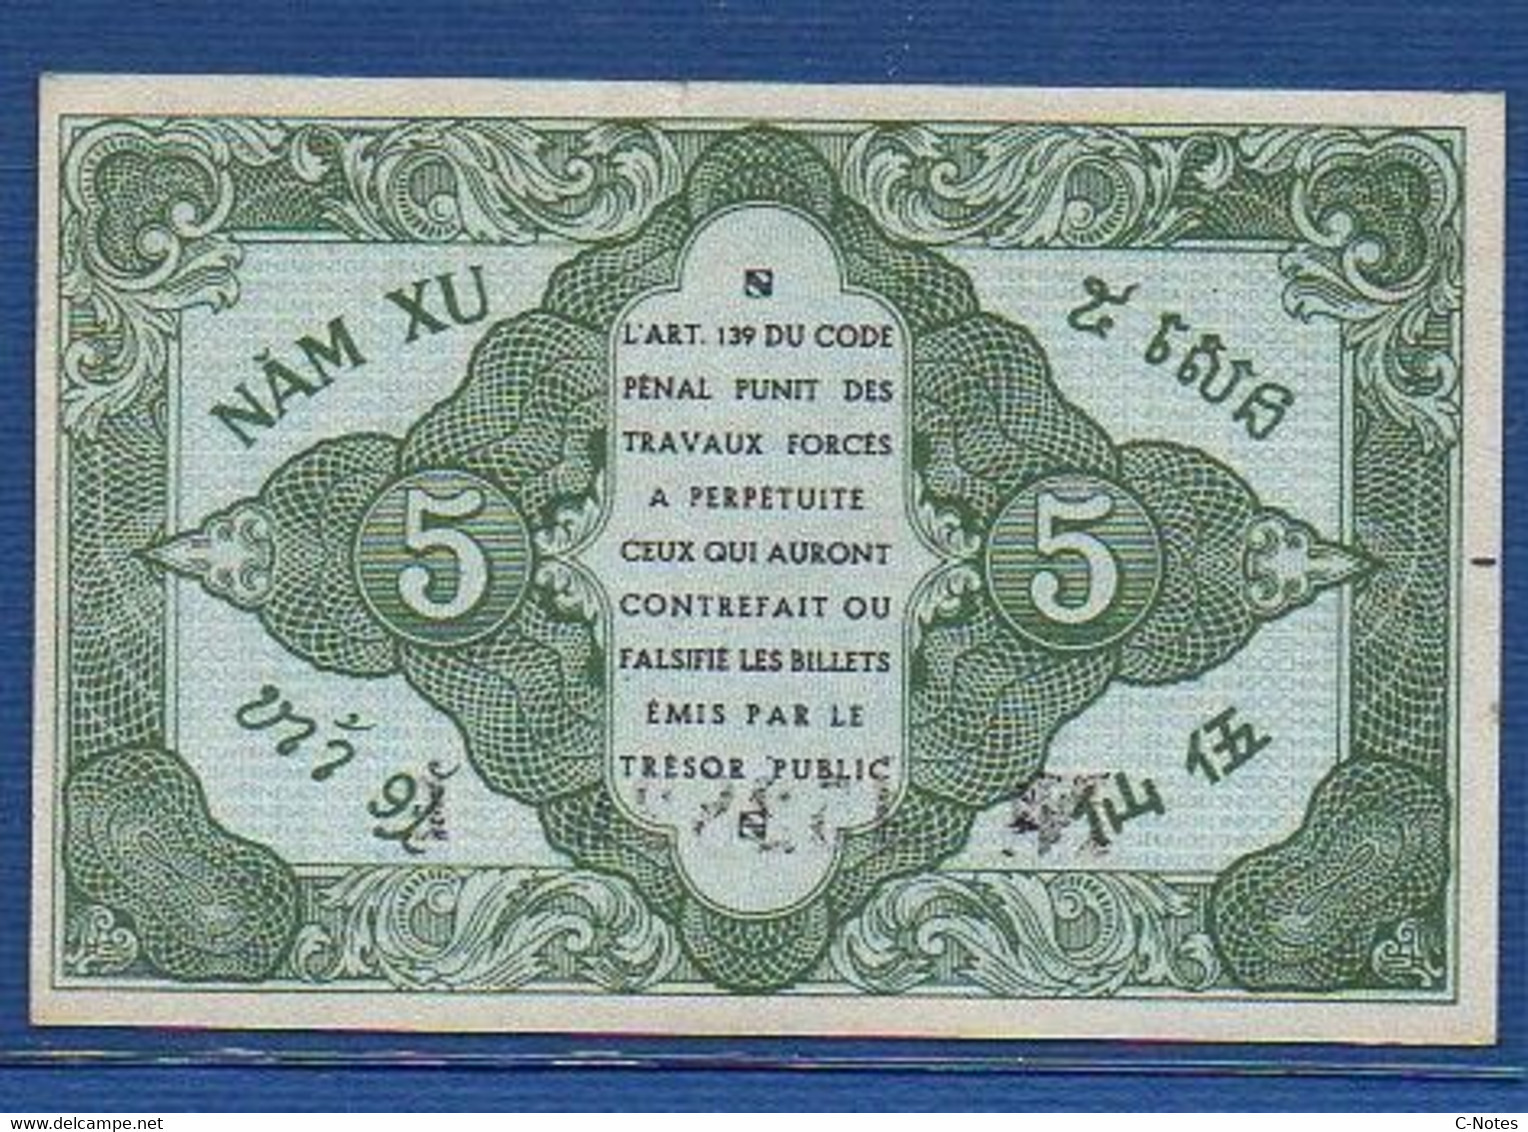 FRENCH INDOCHINA - P. 88a –  5 Cents ND (1942) AUNC-, S/n 452825 E - Indochine